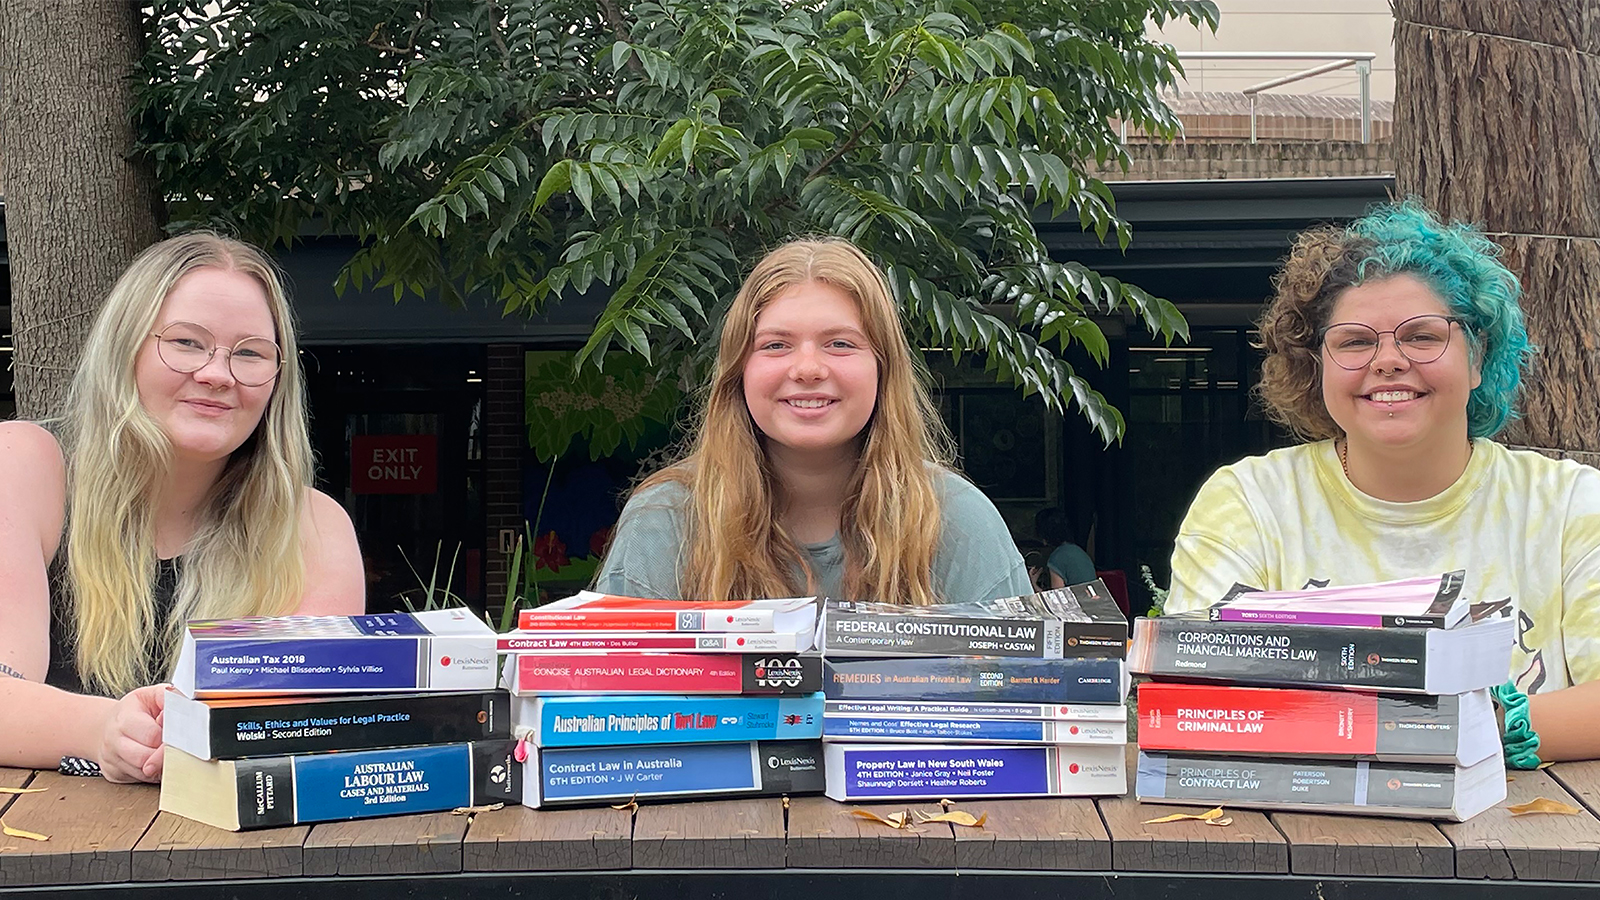 Three University of Wollongong Law students sit at an outdoor bench smiling, surrounded by law textbooks